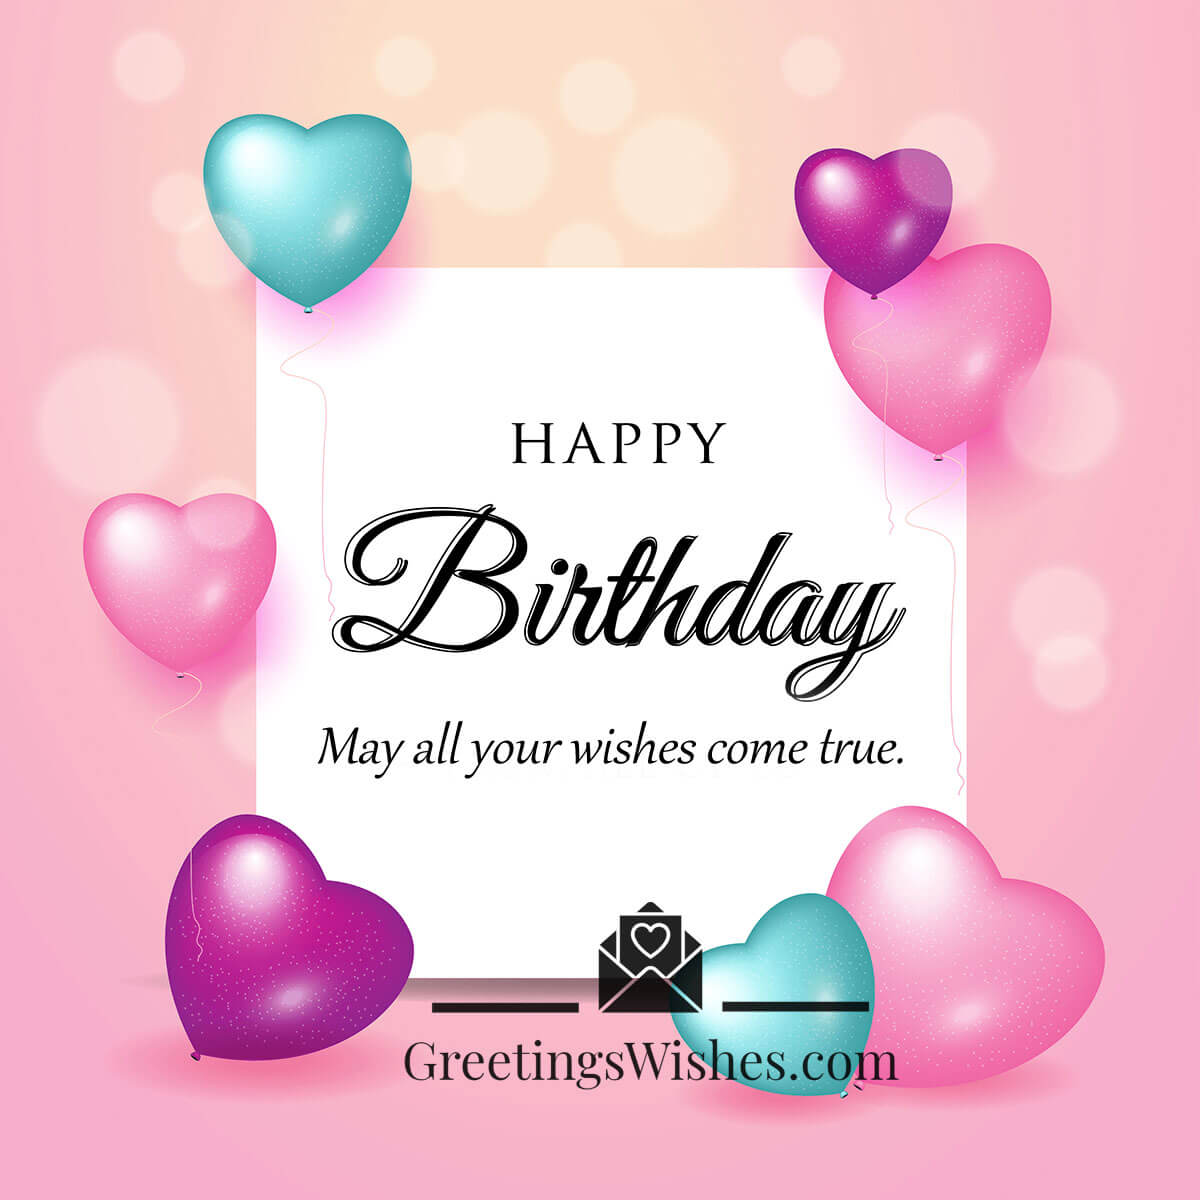 Happy Birthday Wishes - Greetings Wishes